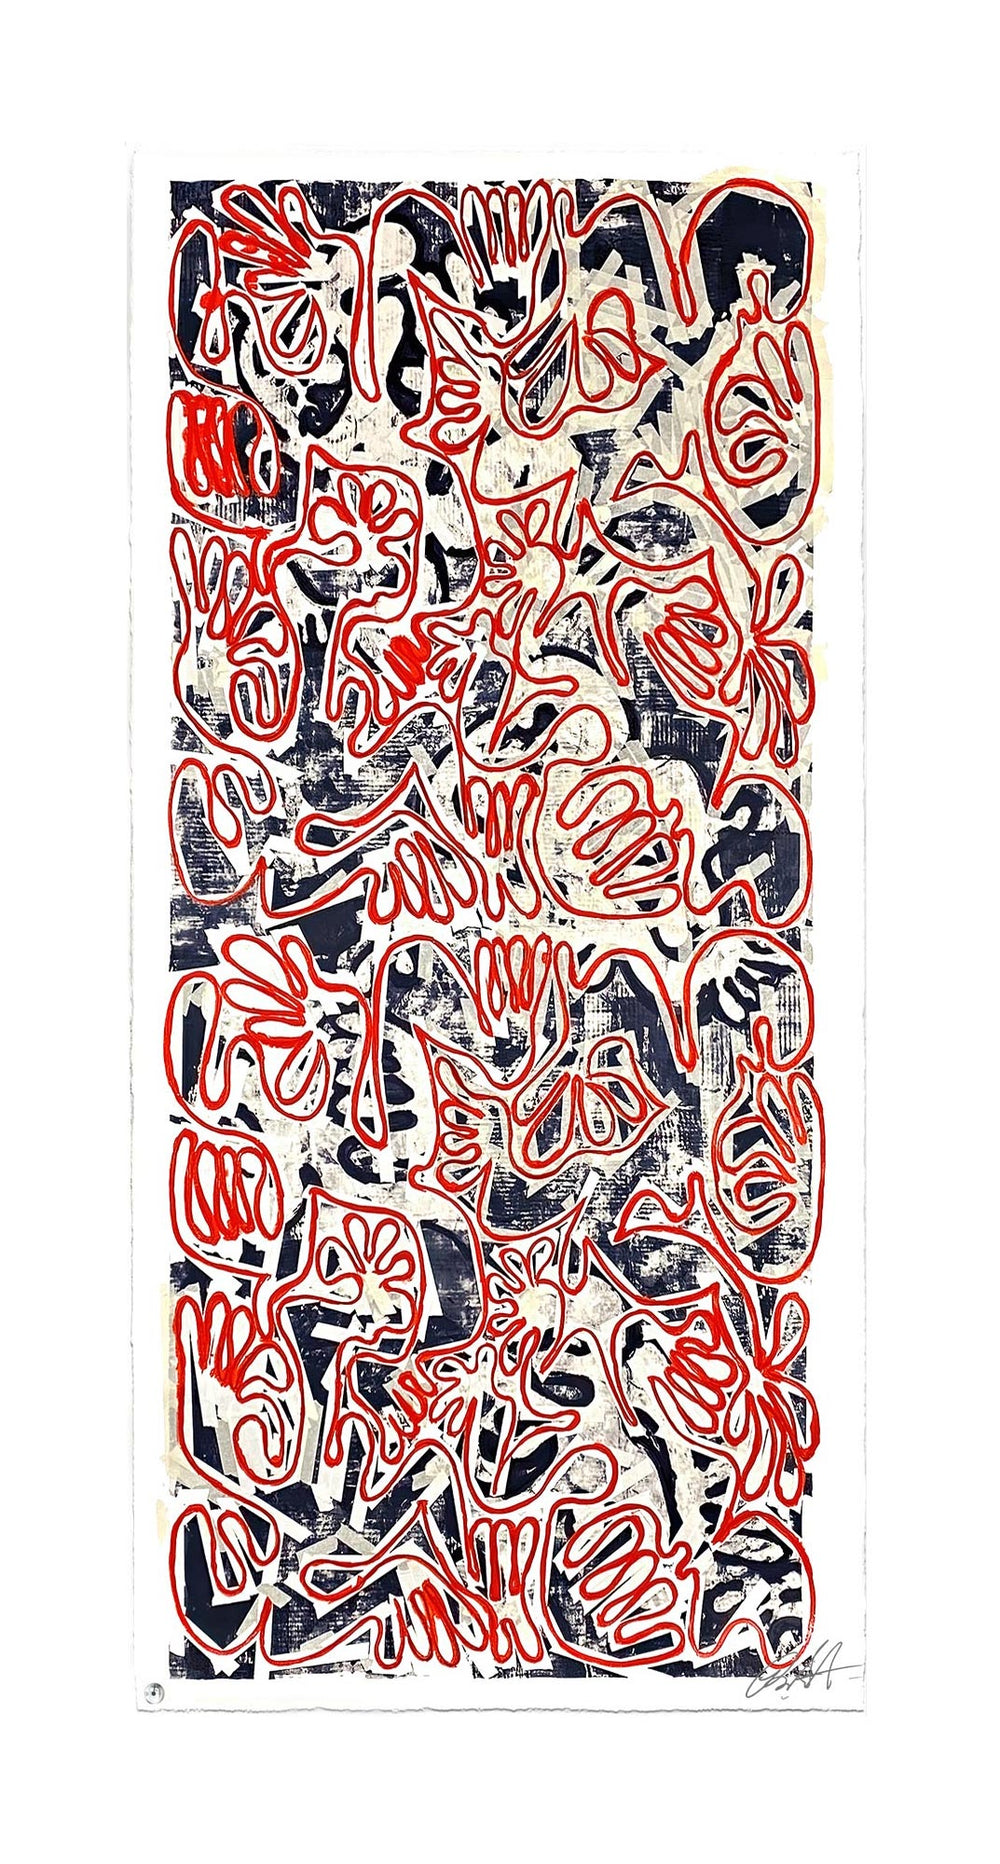 "Covid Chaos Red White & Blue (40 x 100in)" by Robert Santore ©2022. Framed, Hand painted artist silkscreen print, hand printed on the finest archival cold press cotton rag paper with hand torn edges. Painted in the Manhattan studio.